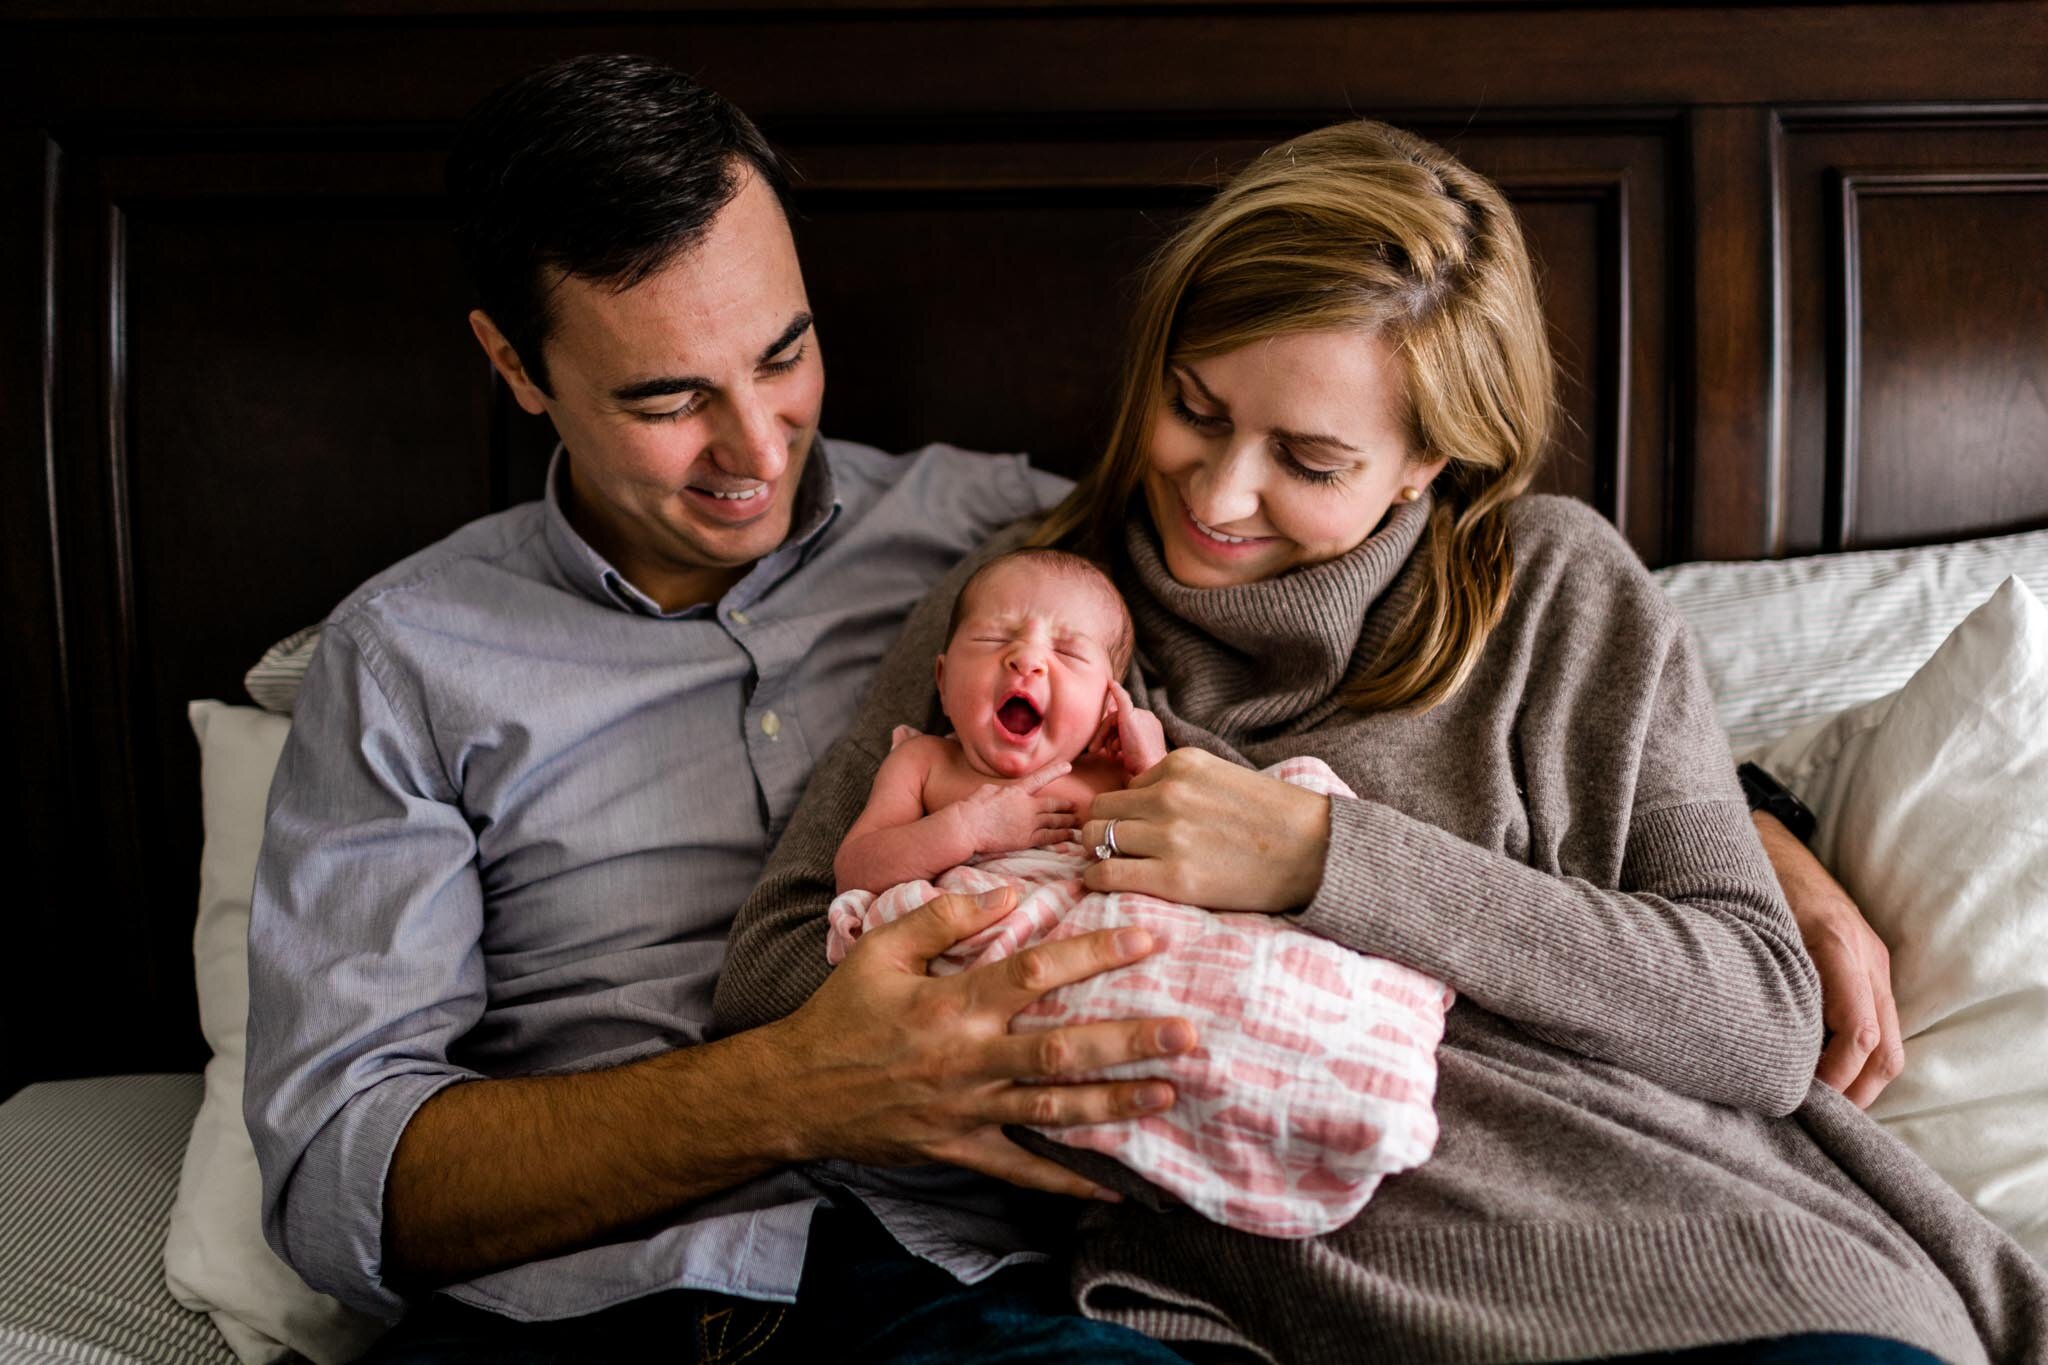 Baby girl yawning with parents by her side | Raleigh Newborn Photographer | By G. Lin Photography